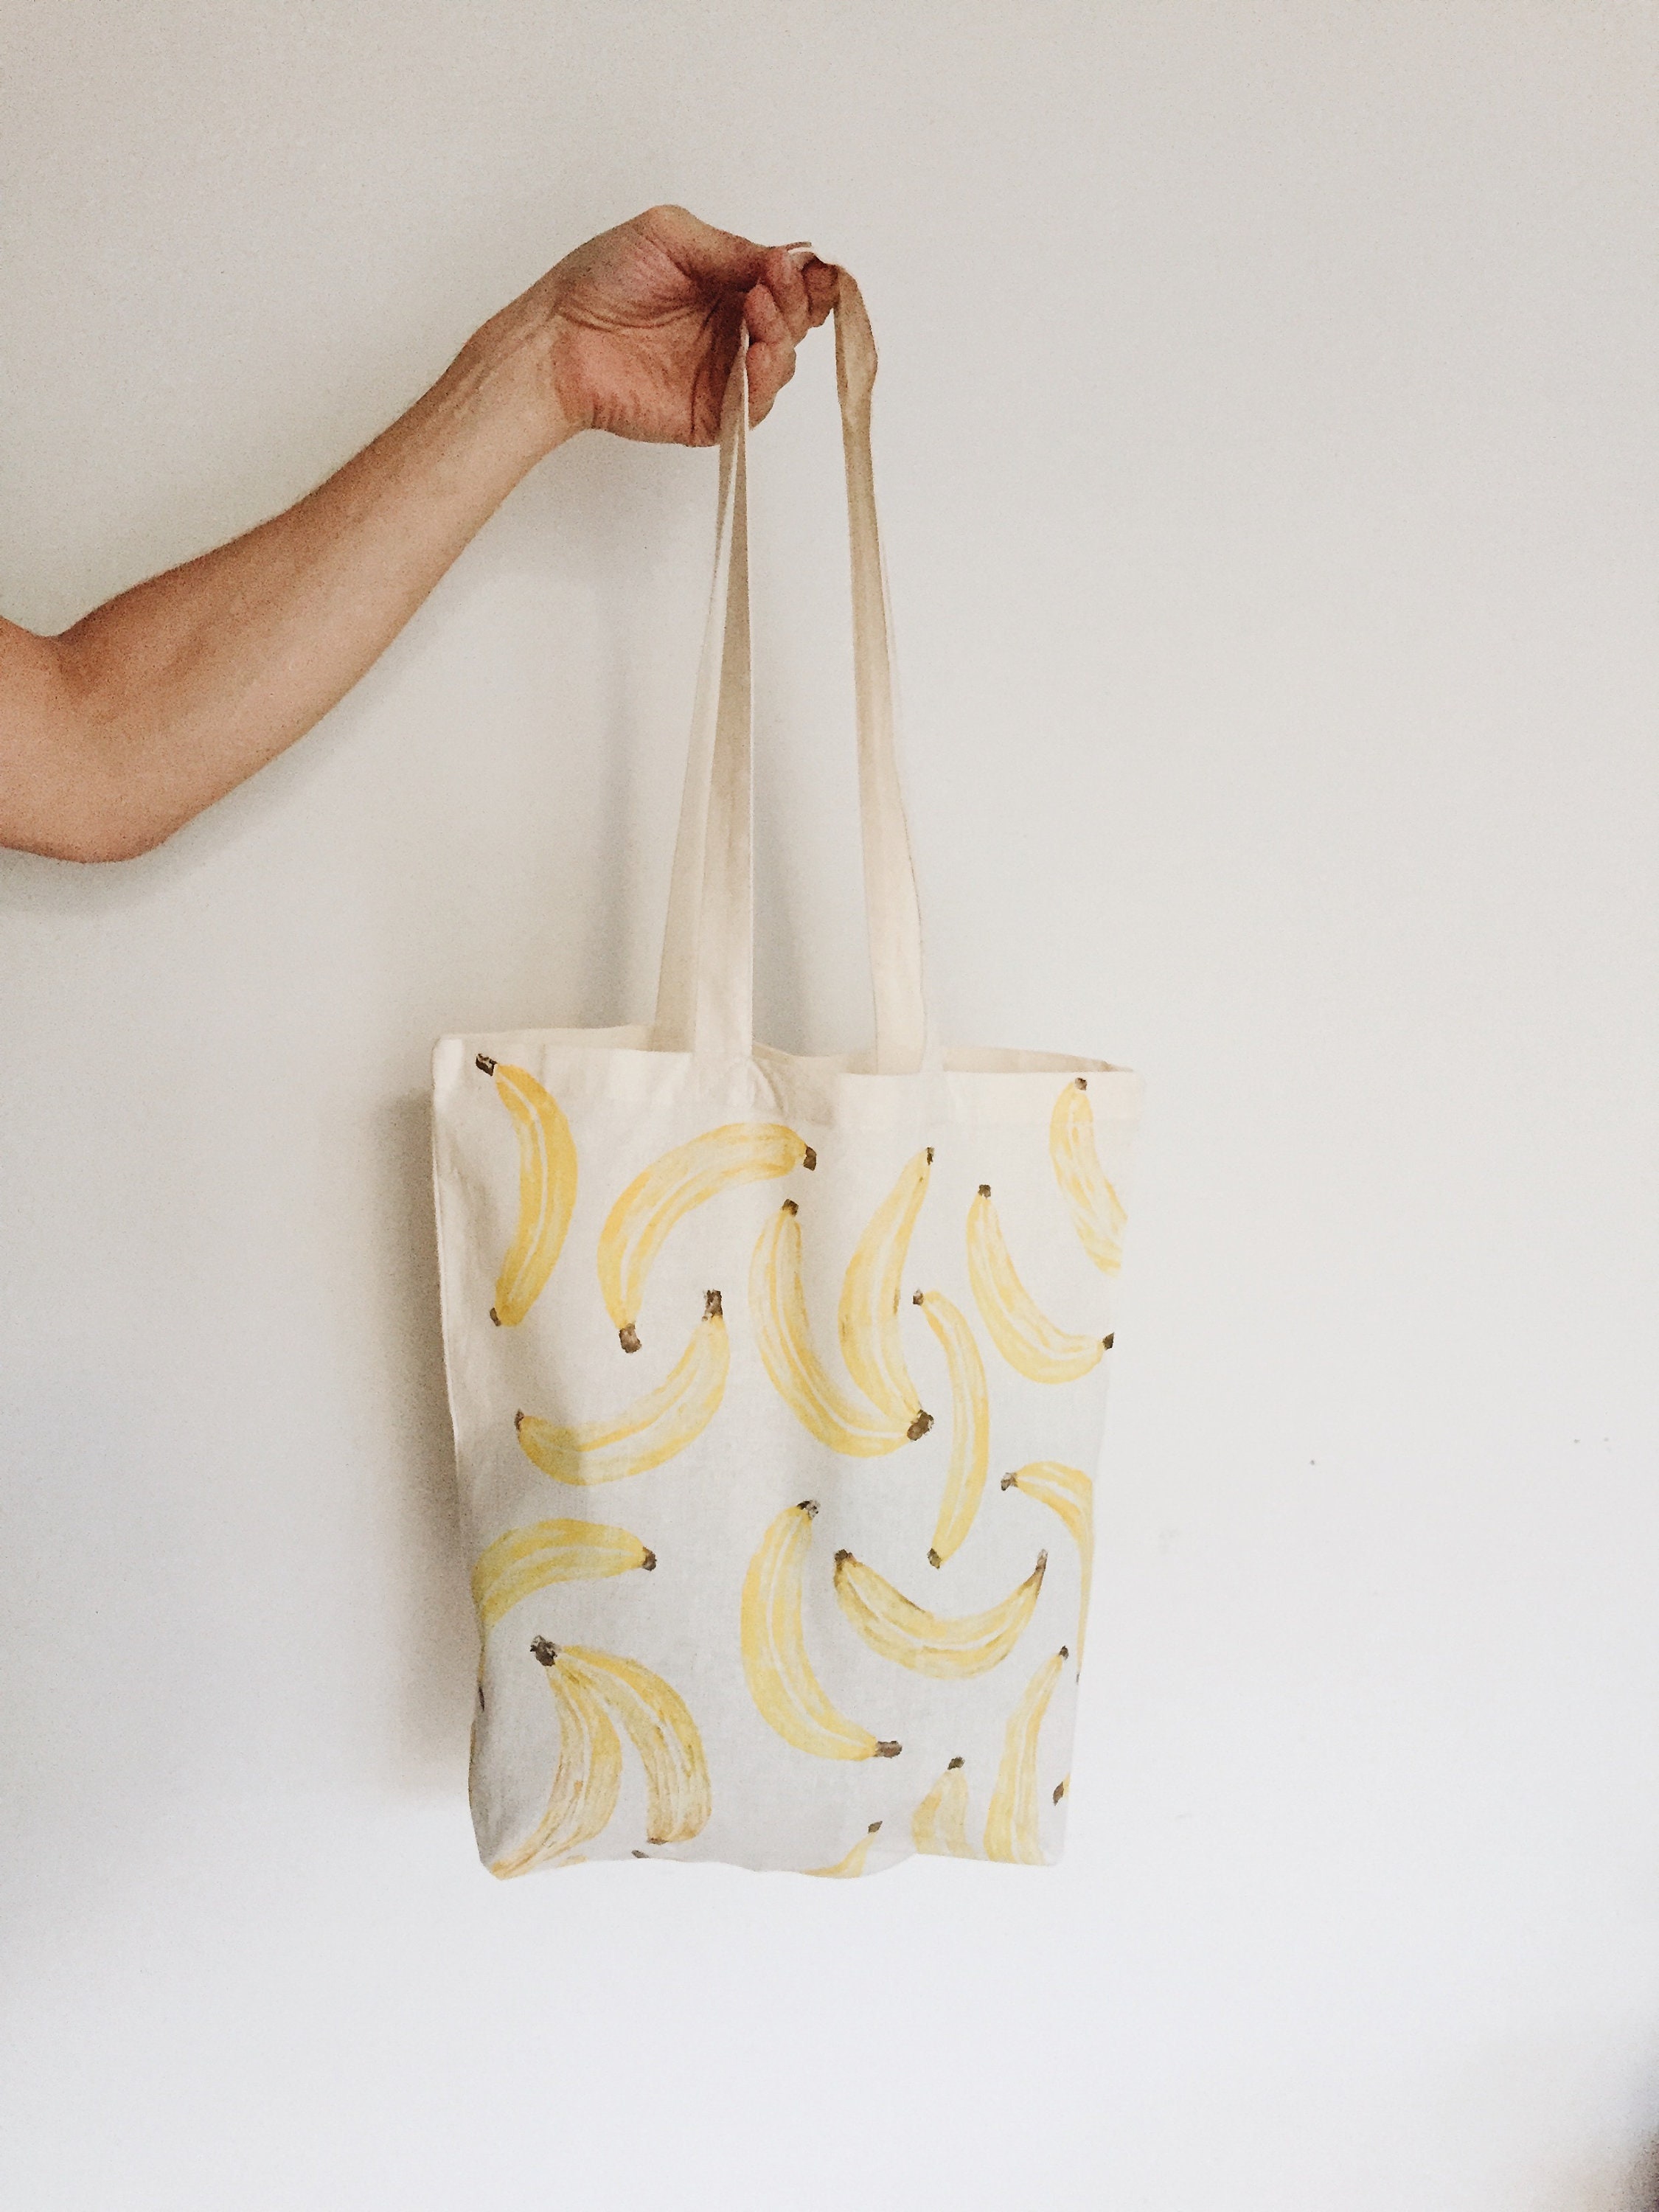 BANANANINA - Coveting for a useful and perfect sized tote